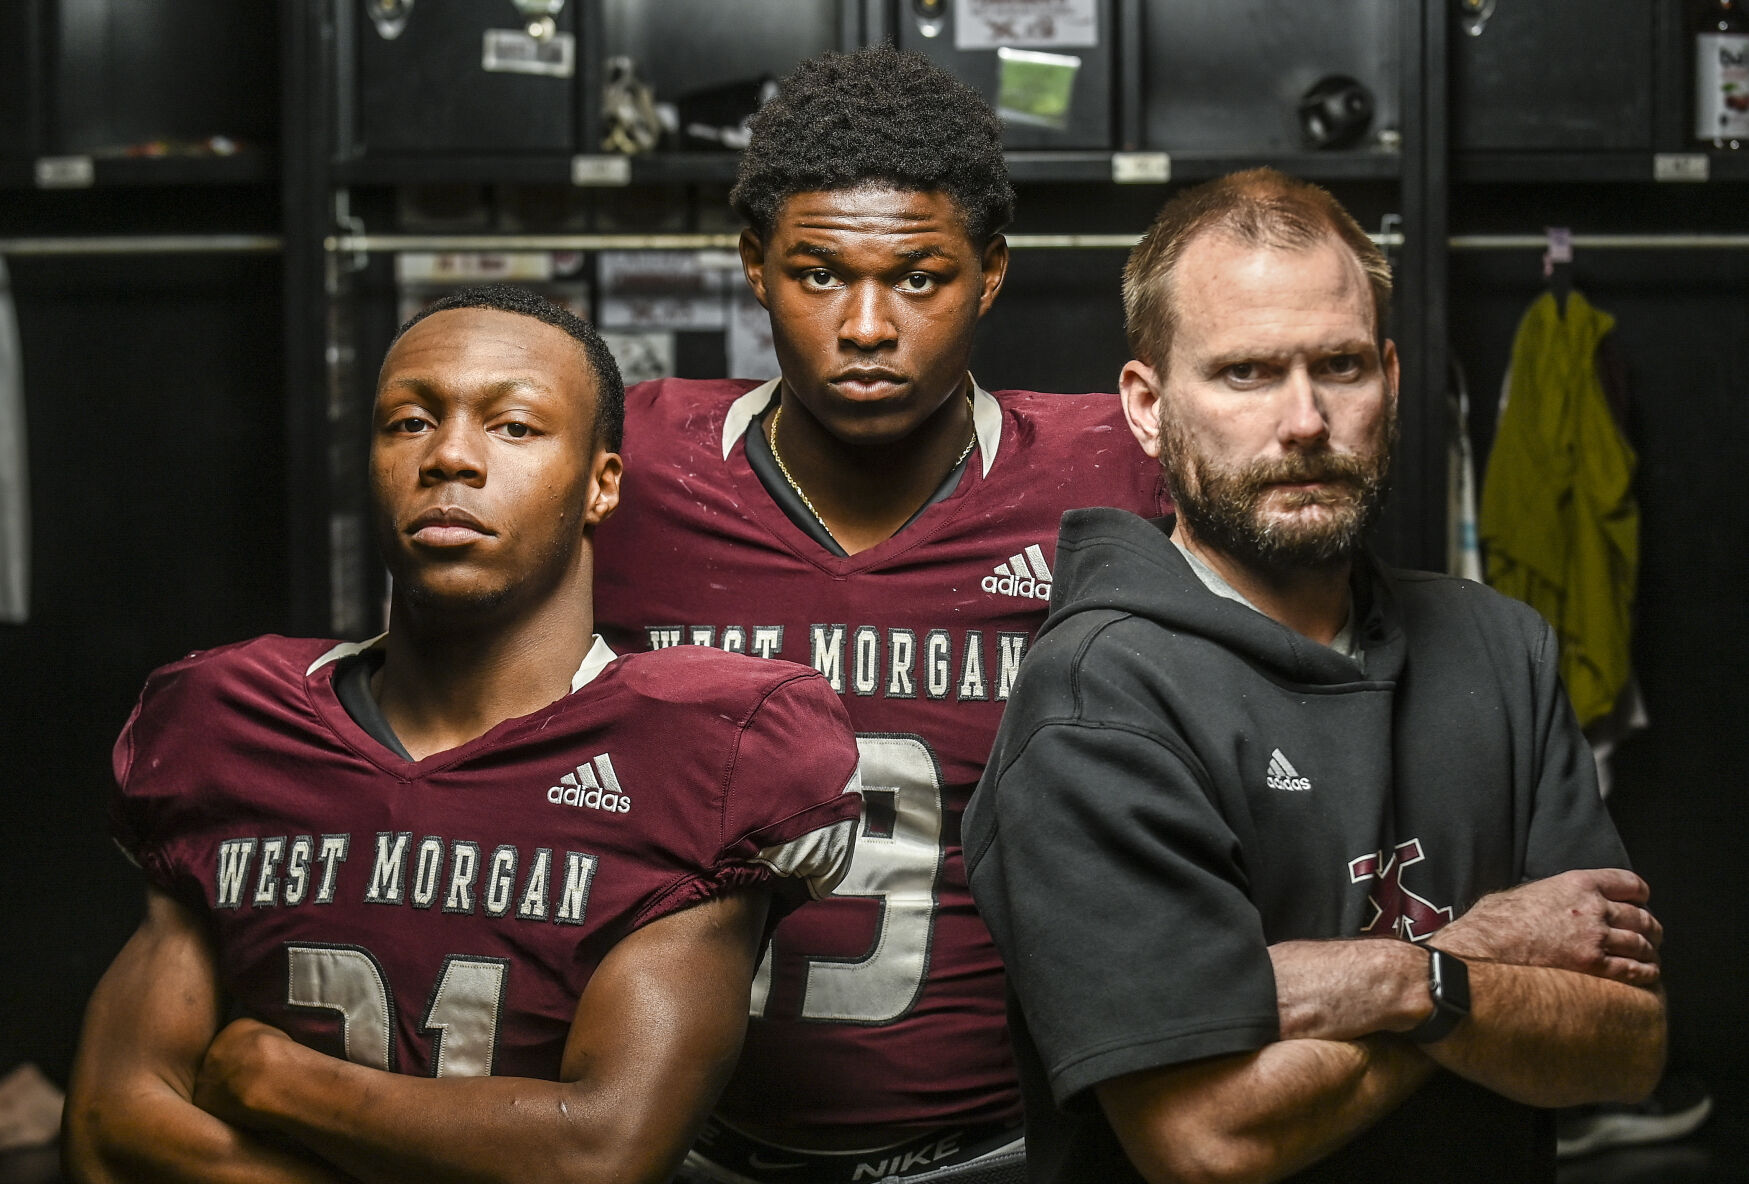 West Morgan Football: Record-Breaking Season with Key Players and Coach of the Year